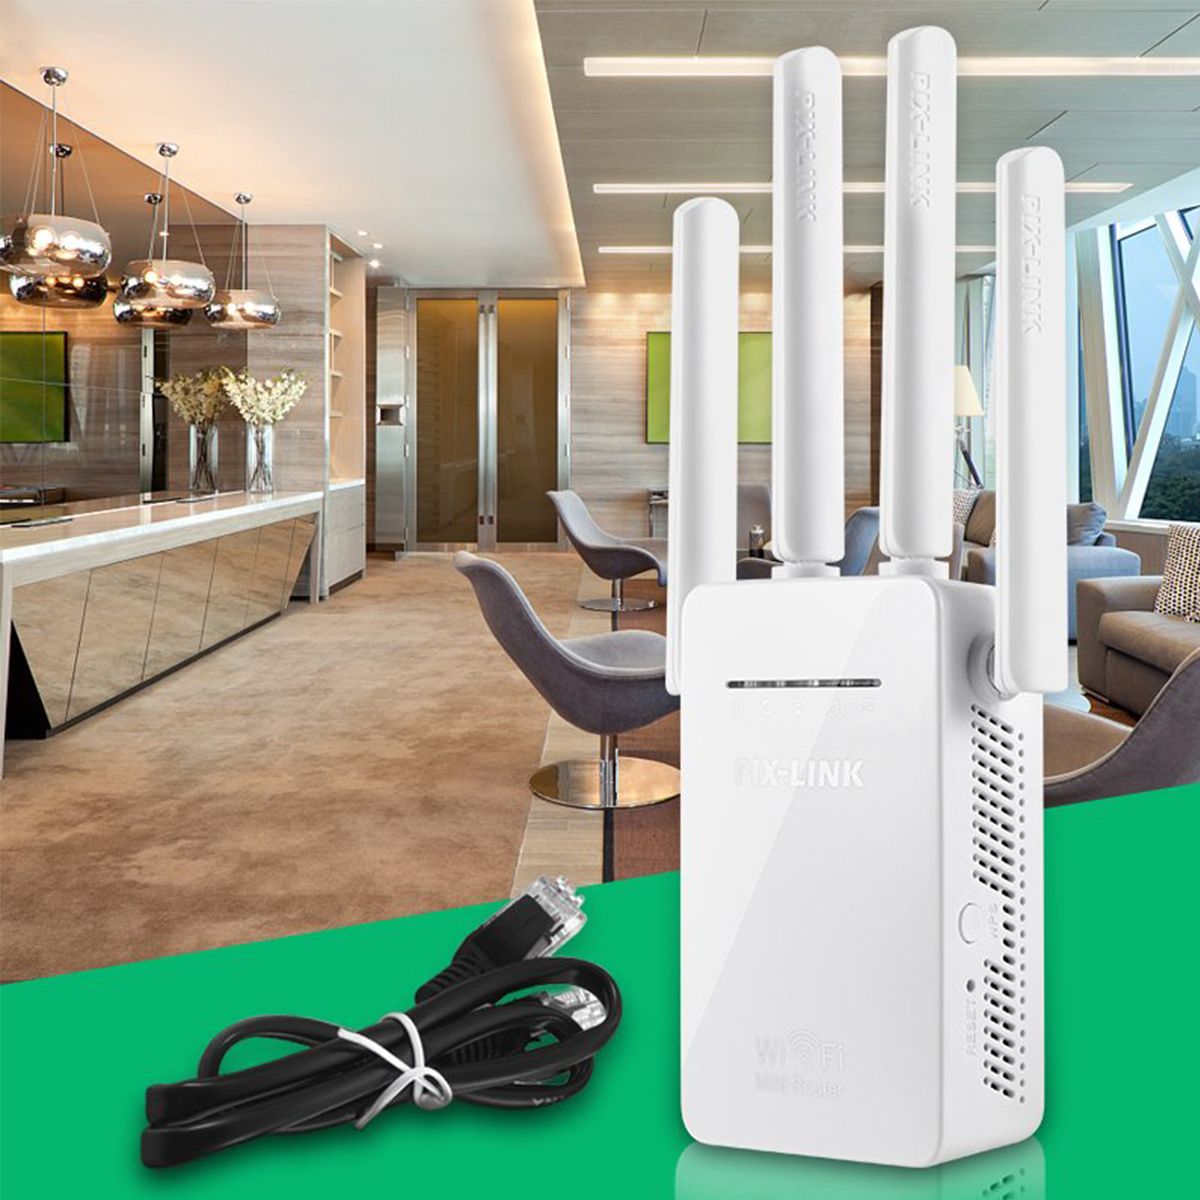 PIX-LINK-Dual-Band-Wifi-Extender-Repeater-Wireless-Router-Range-Network-Signal-Booster-WiFi-Outdoor--1621220